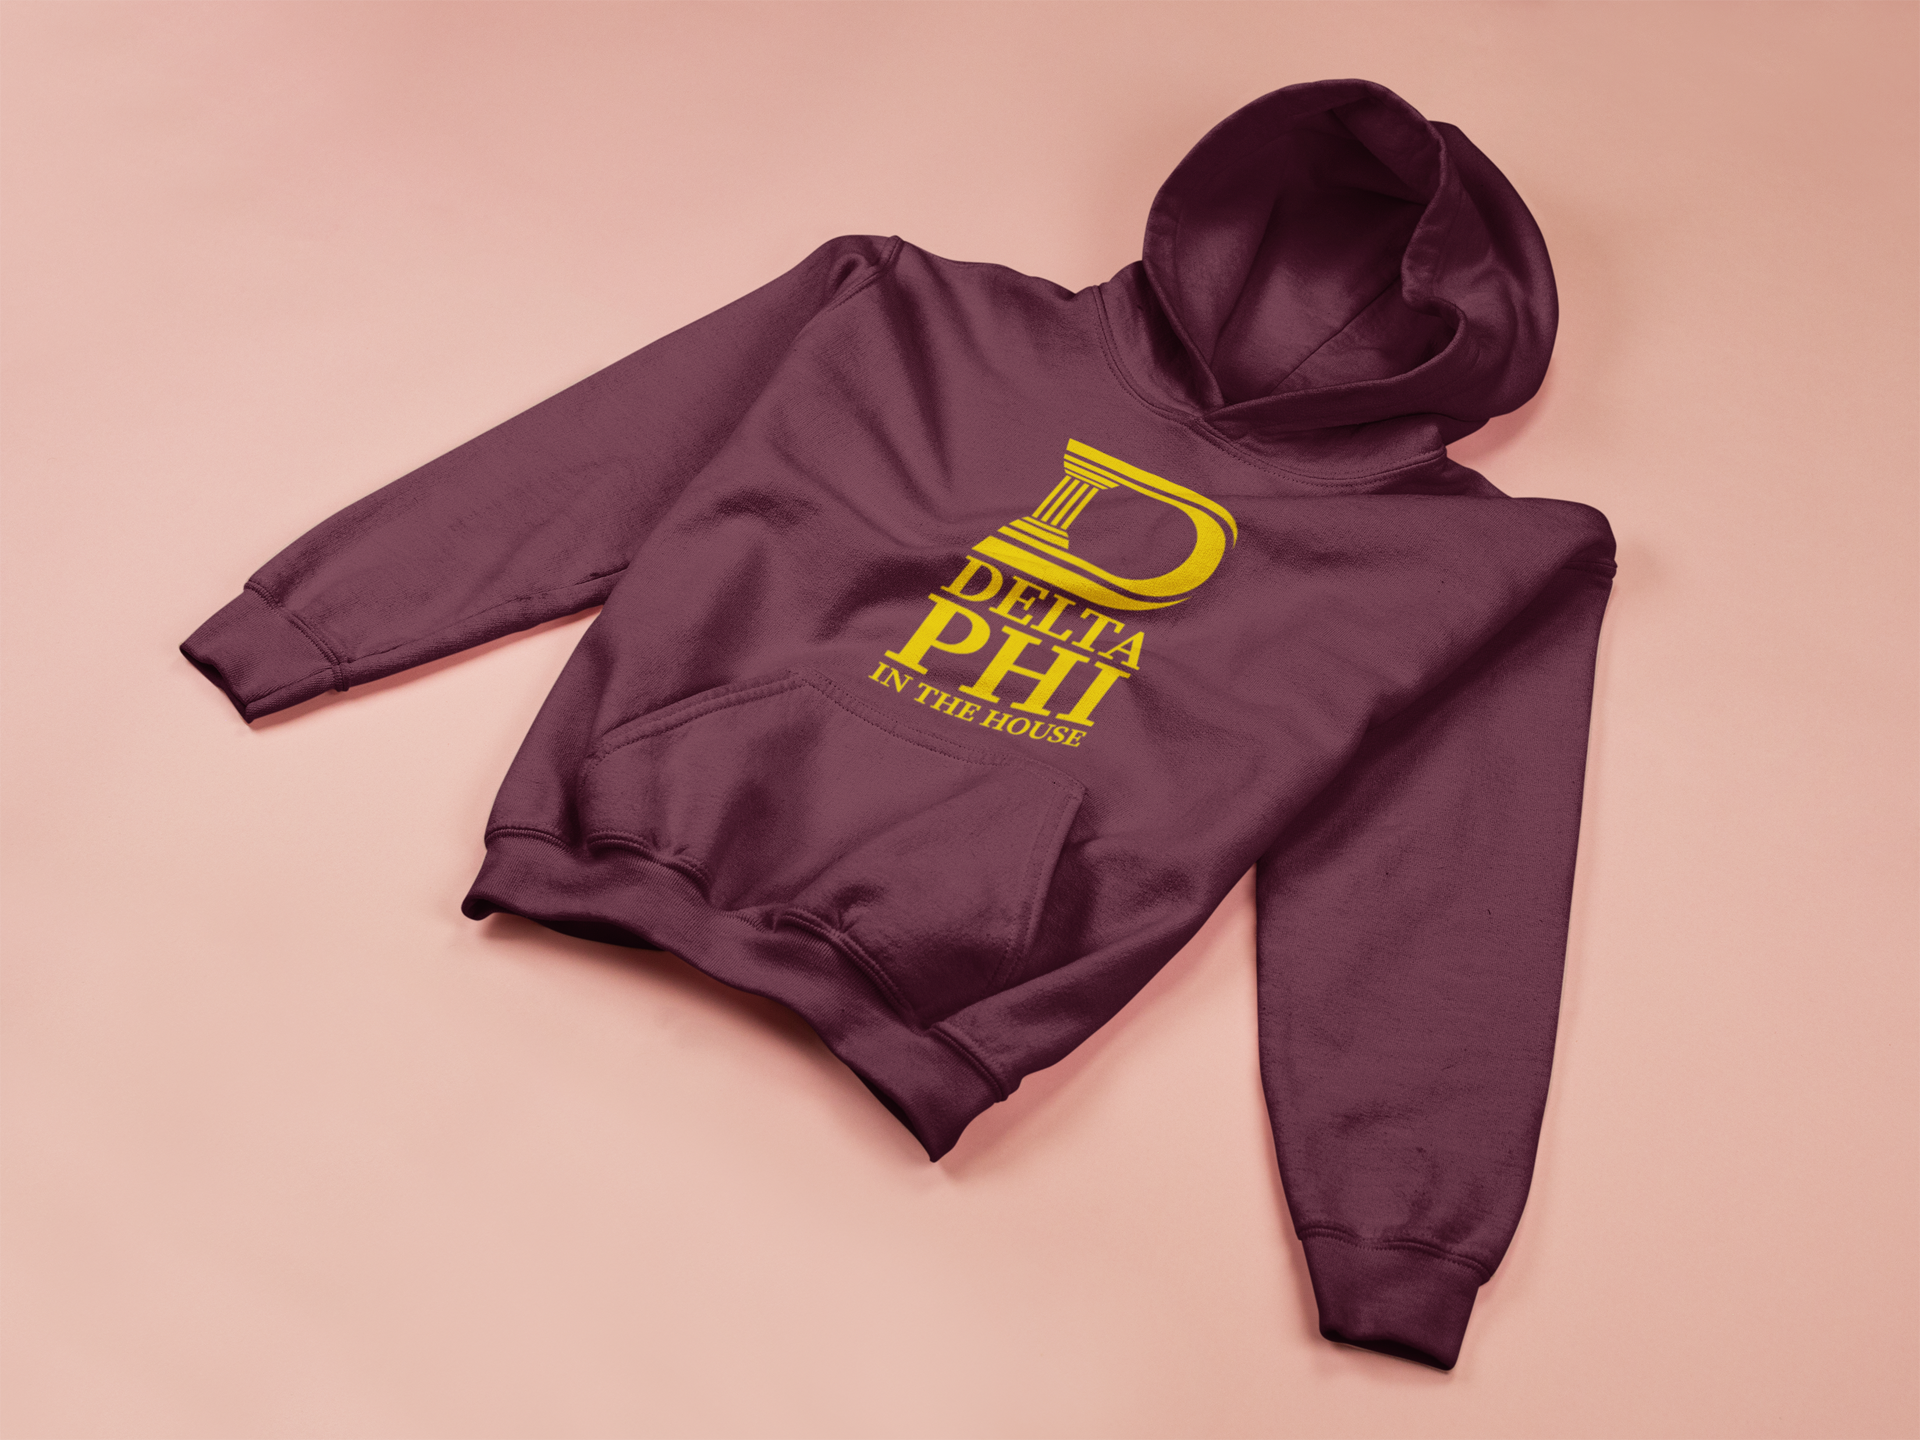 Download Free Hoodie Mockup Template by Placeit on Dribbble